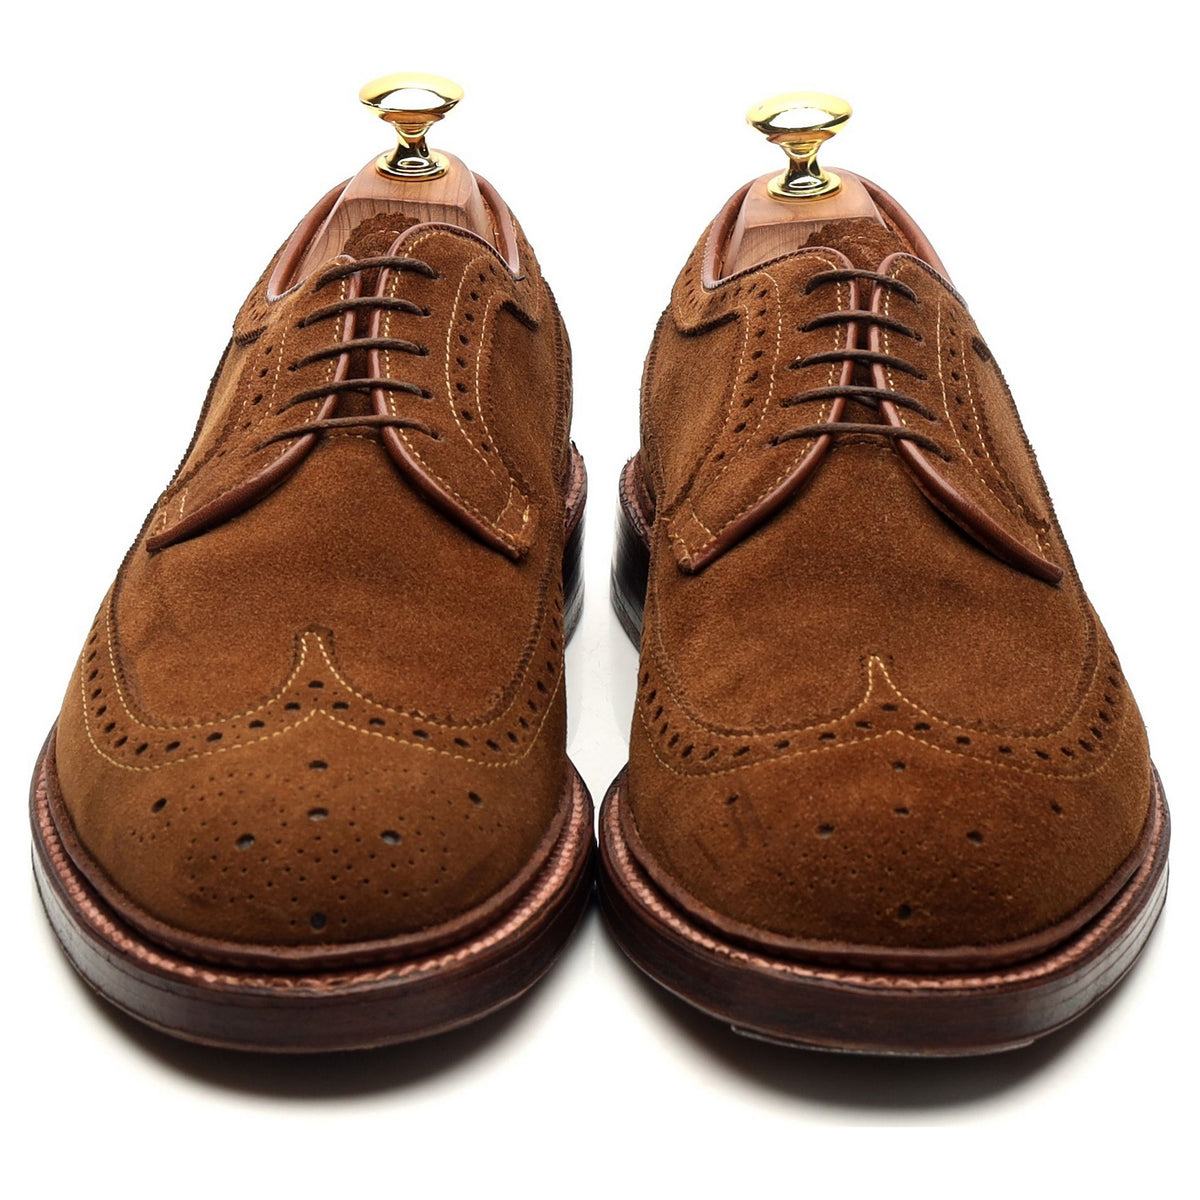 &#39;9794&#39; Brown Suede Derby Brogues UK 7.5 US 8 E